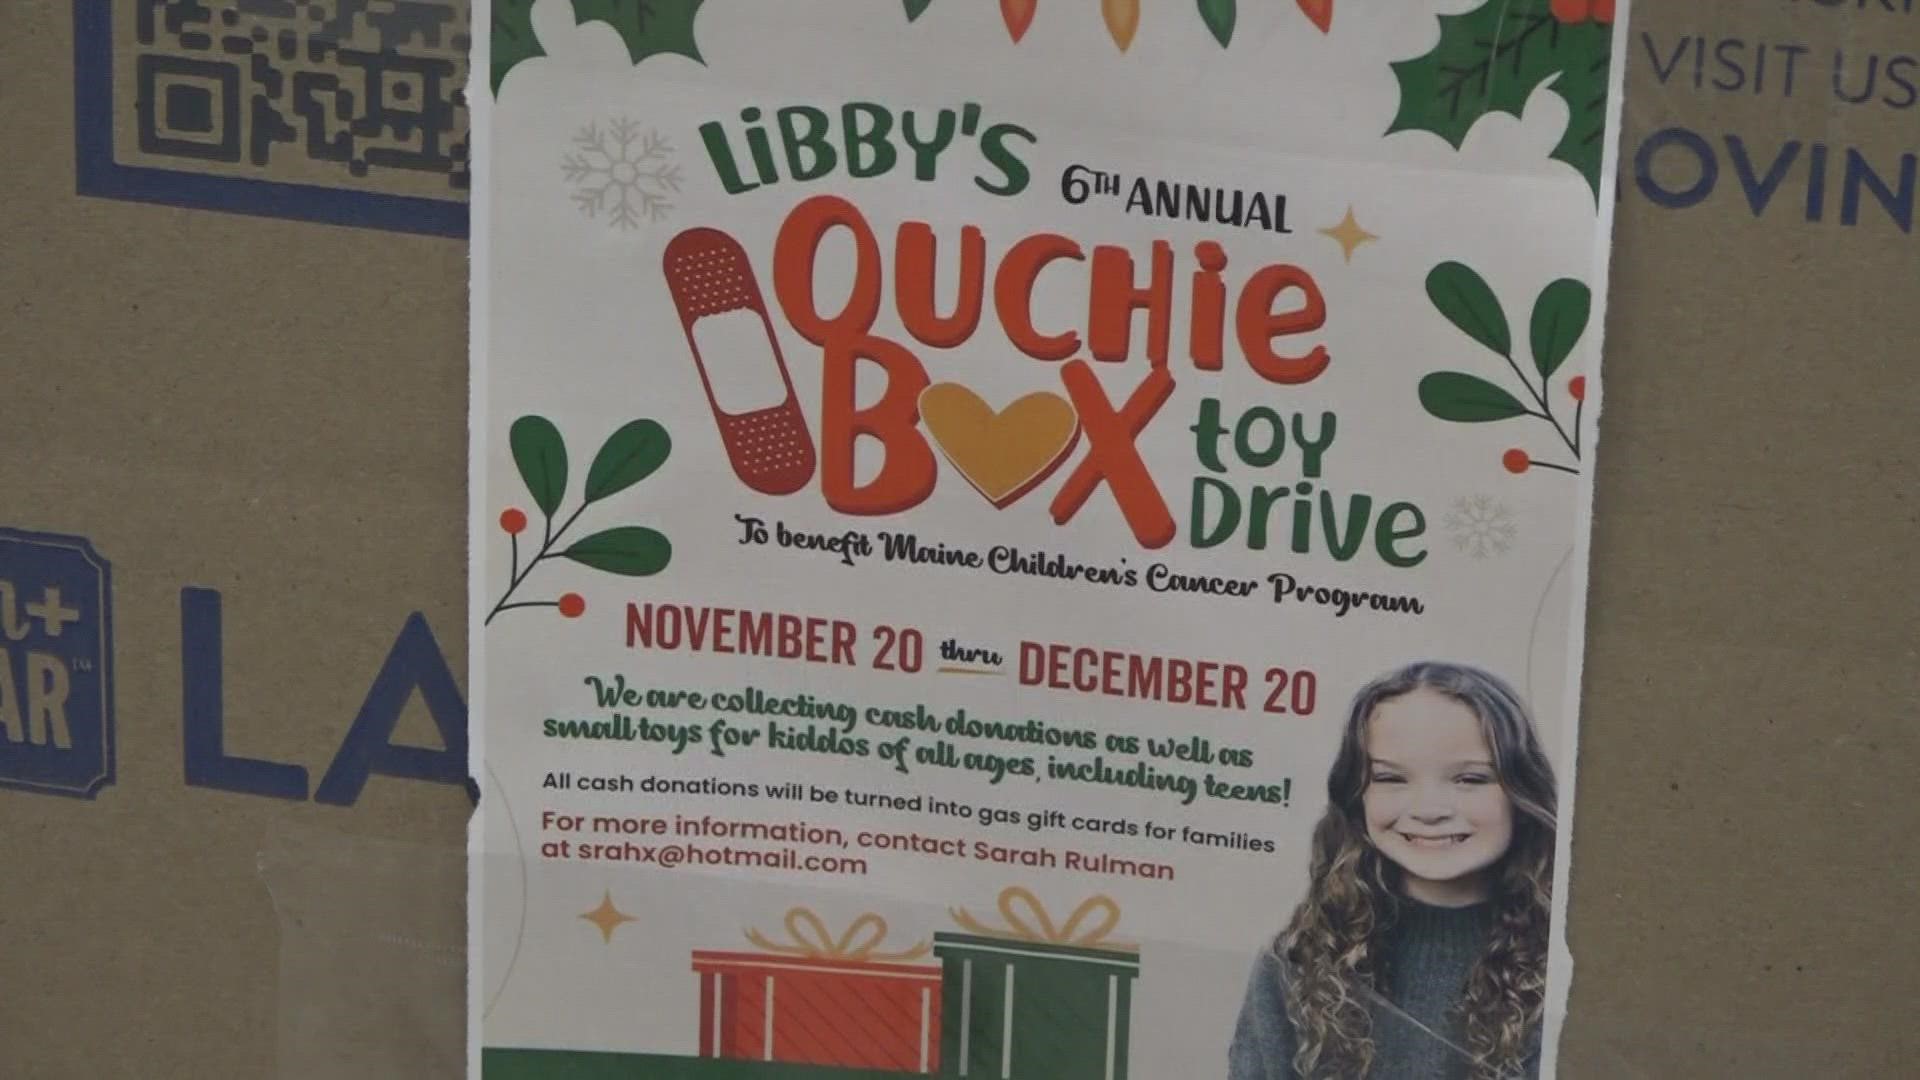 The "Ouchie Box" is filled with toys for kids and teens who are battling any oncology or hematology diseases, like cancer. They can choose a toy after treatments.